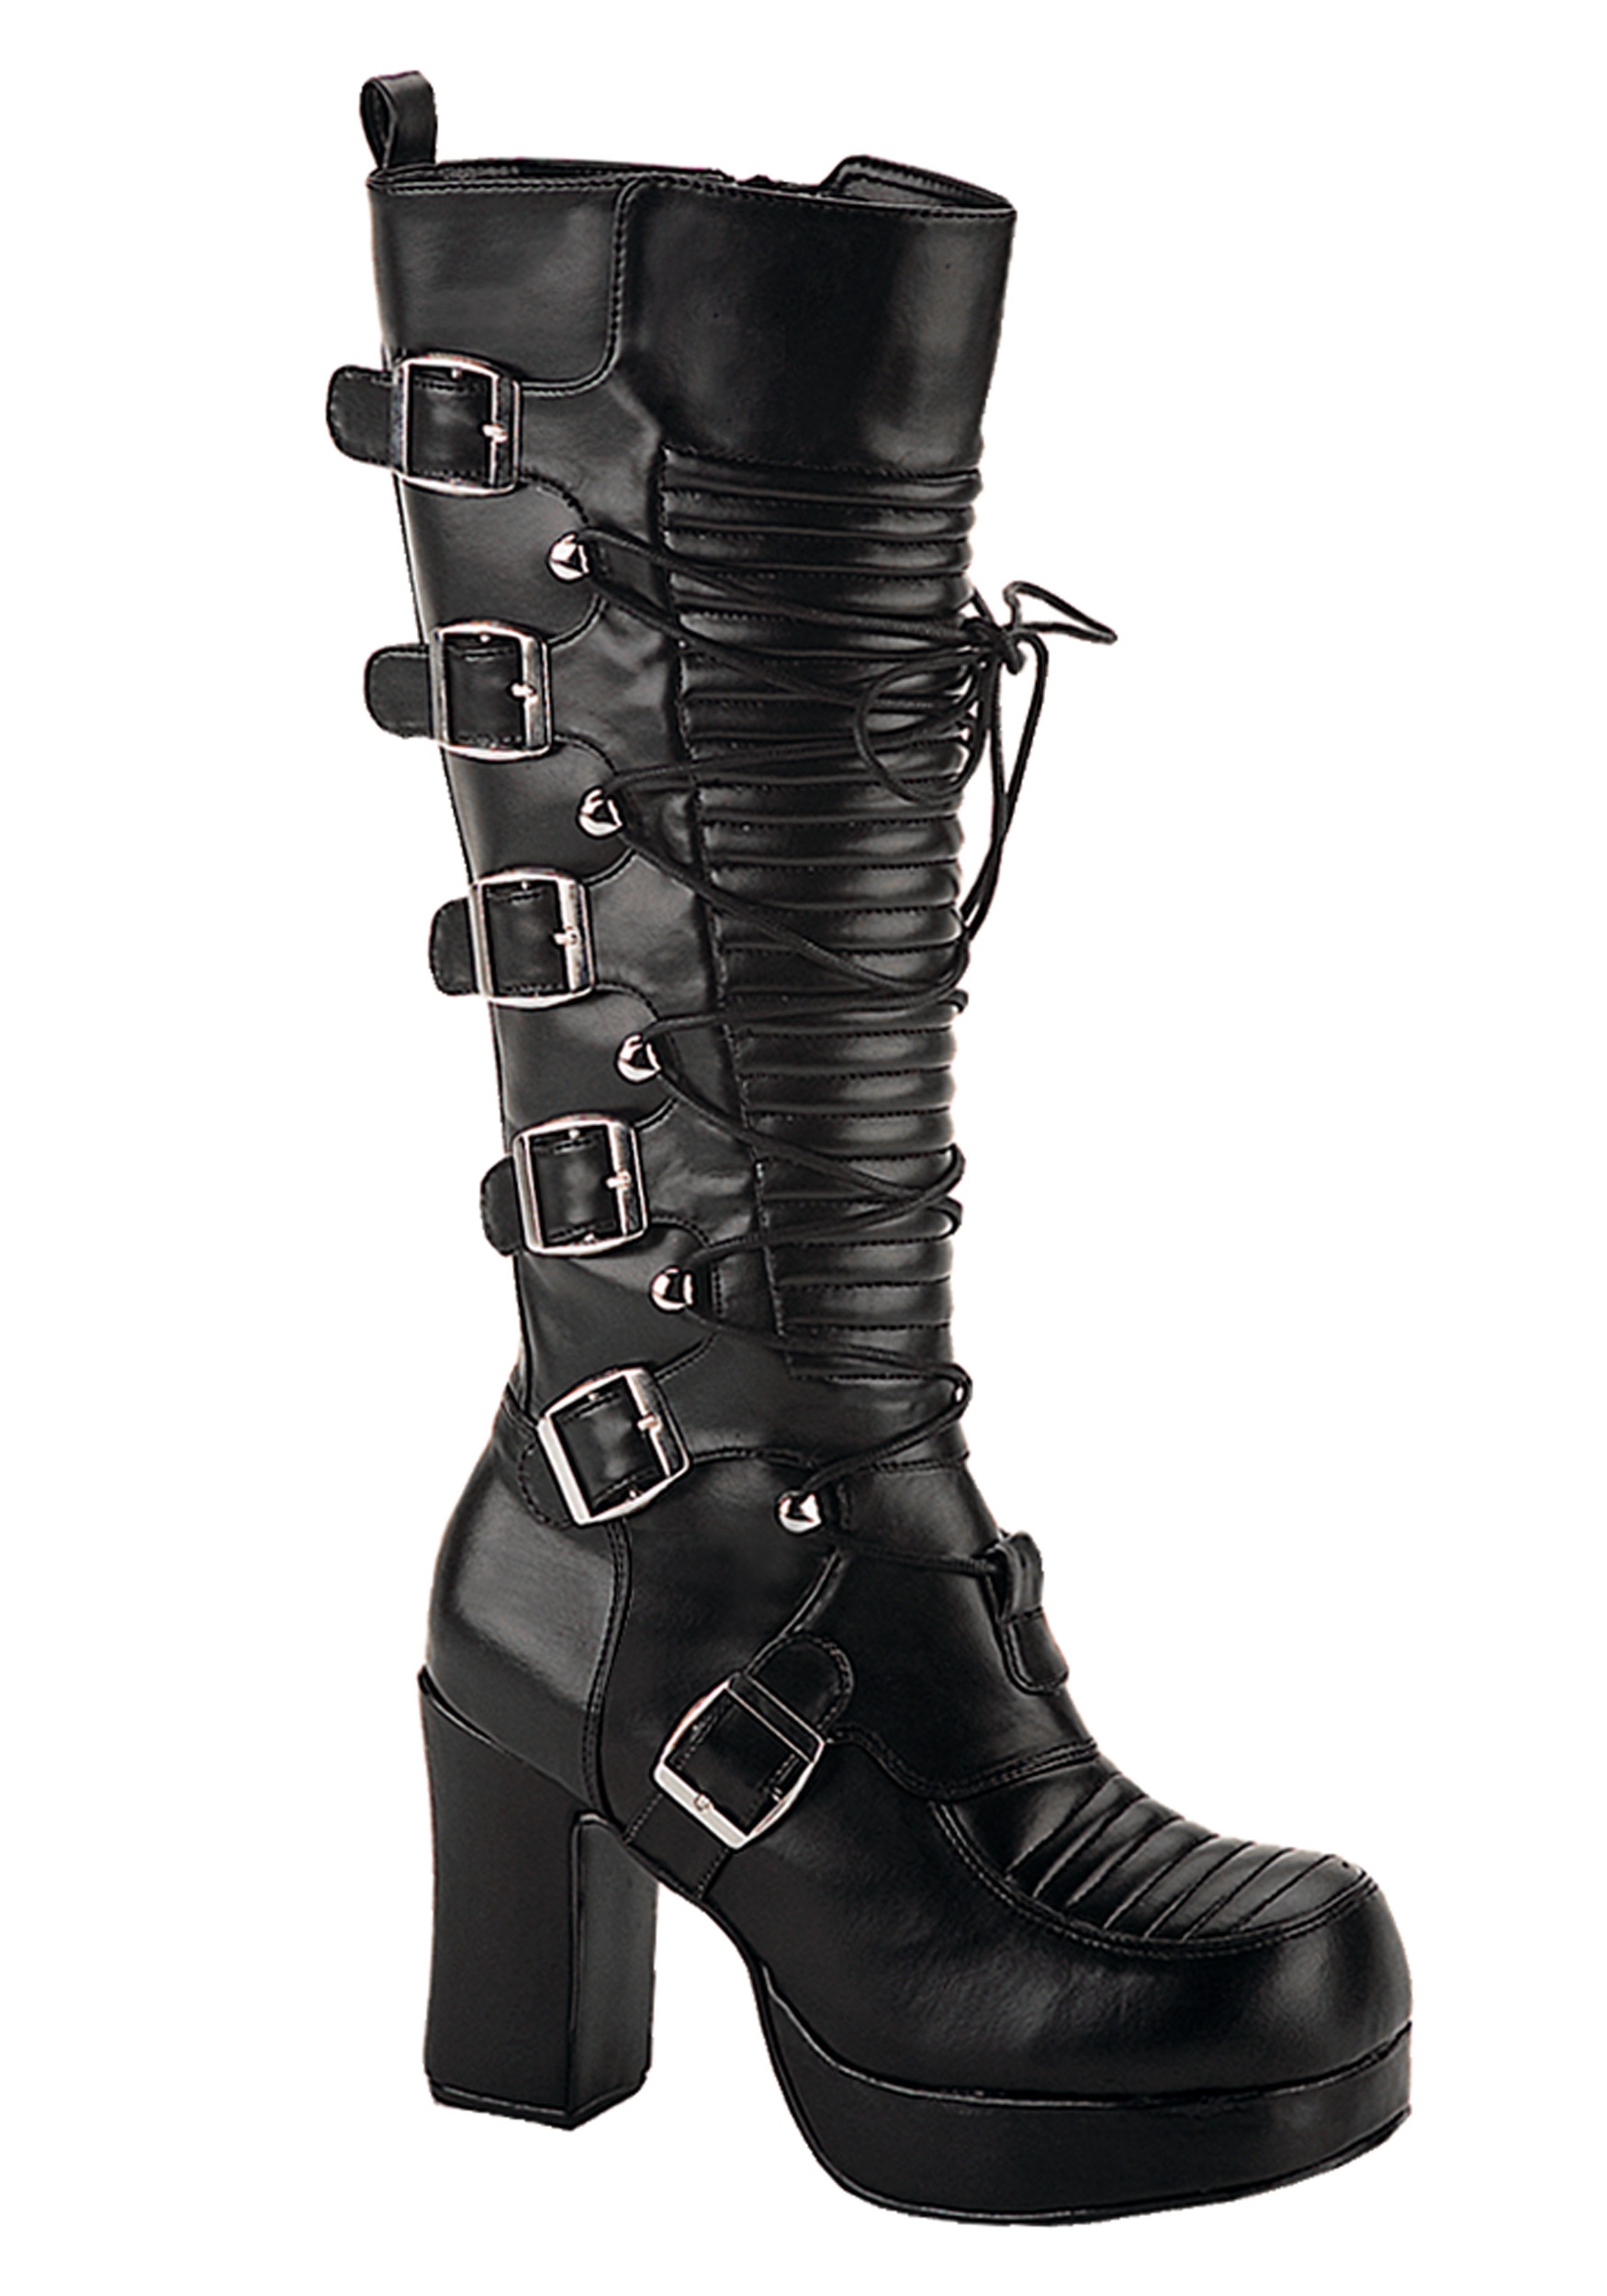 Women’s Gothic Buckle Boots